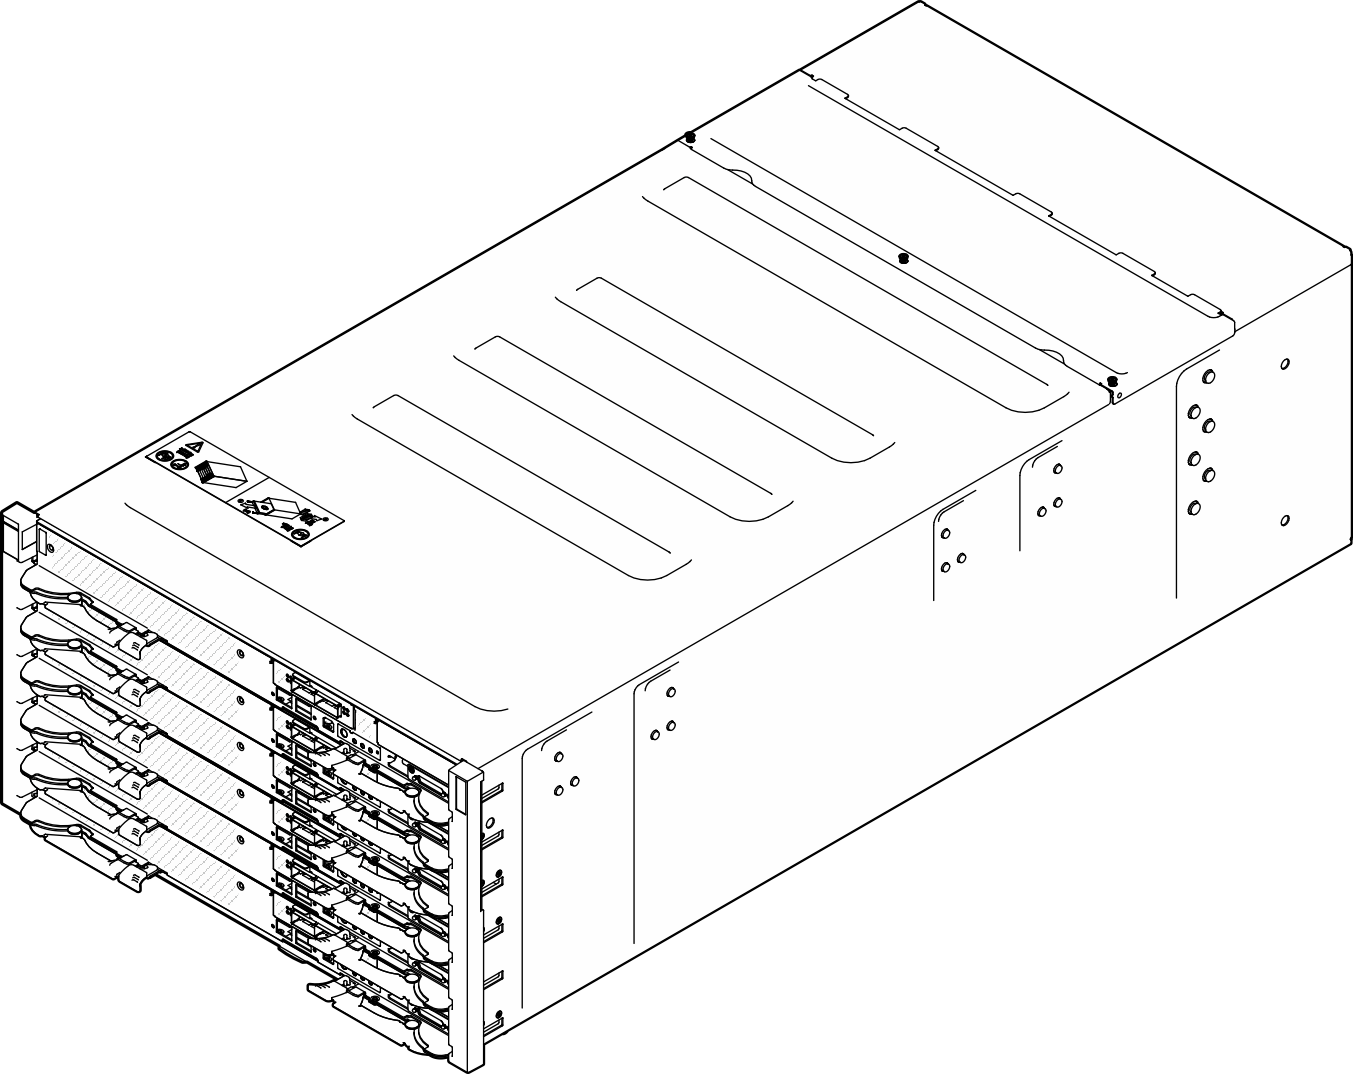 Enclosure with six SD650-N V3 trays installed